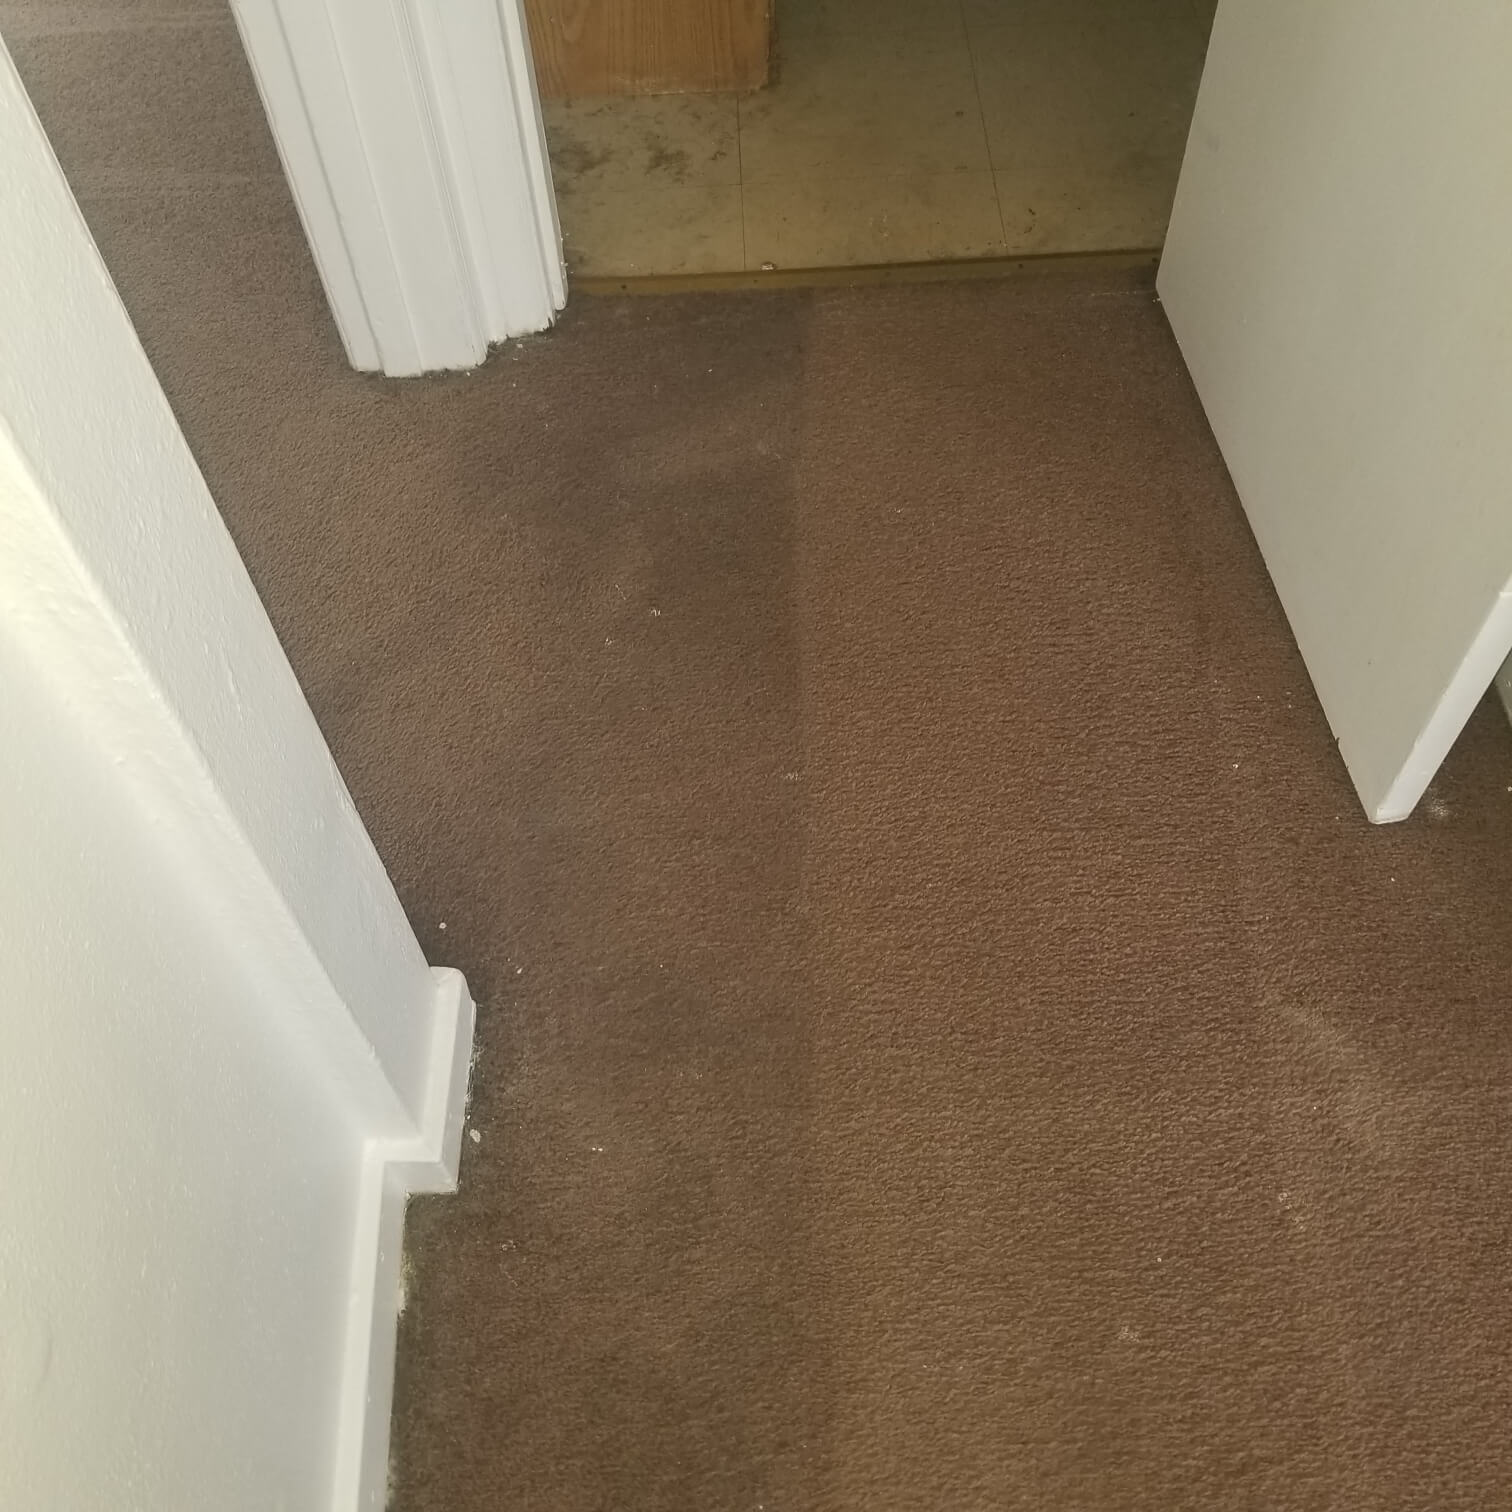 Before and after of a newly cleaned carpet from Stanley Steemer Rockford